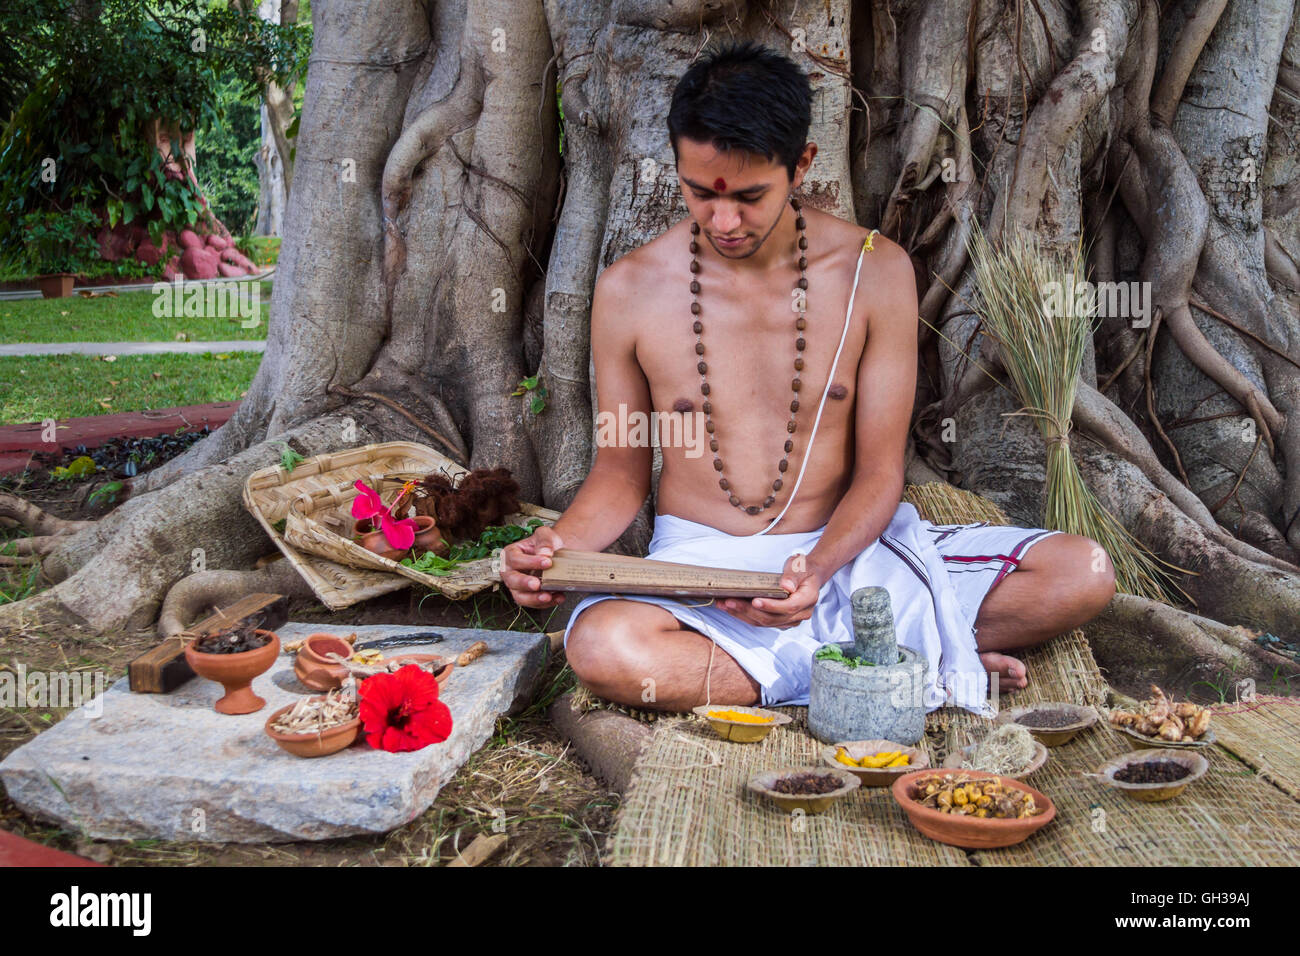 A young traditional ayurvedic doctor reading an ancient palm-leaf scroll on natural medicine. Stock Photo